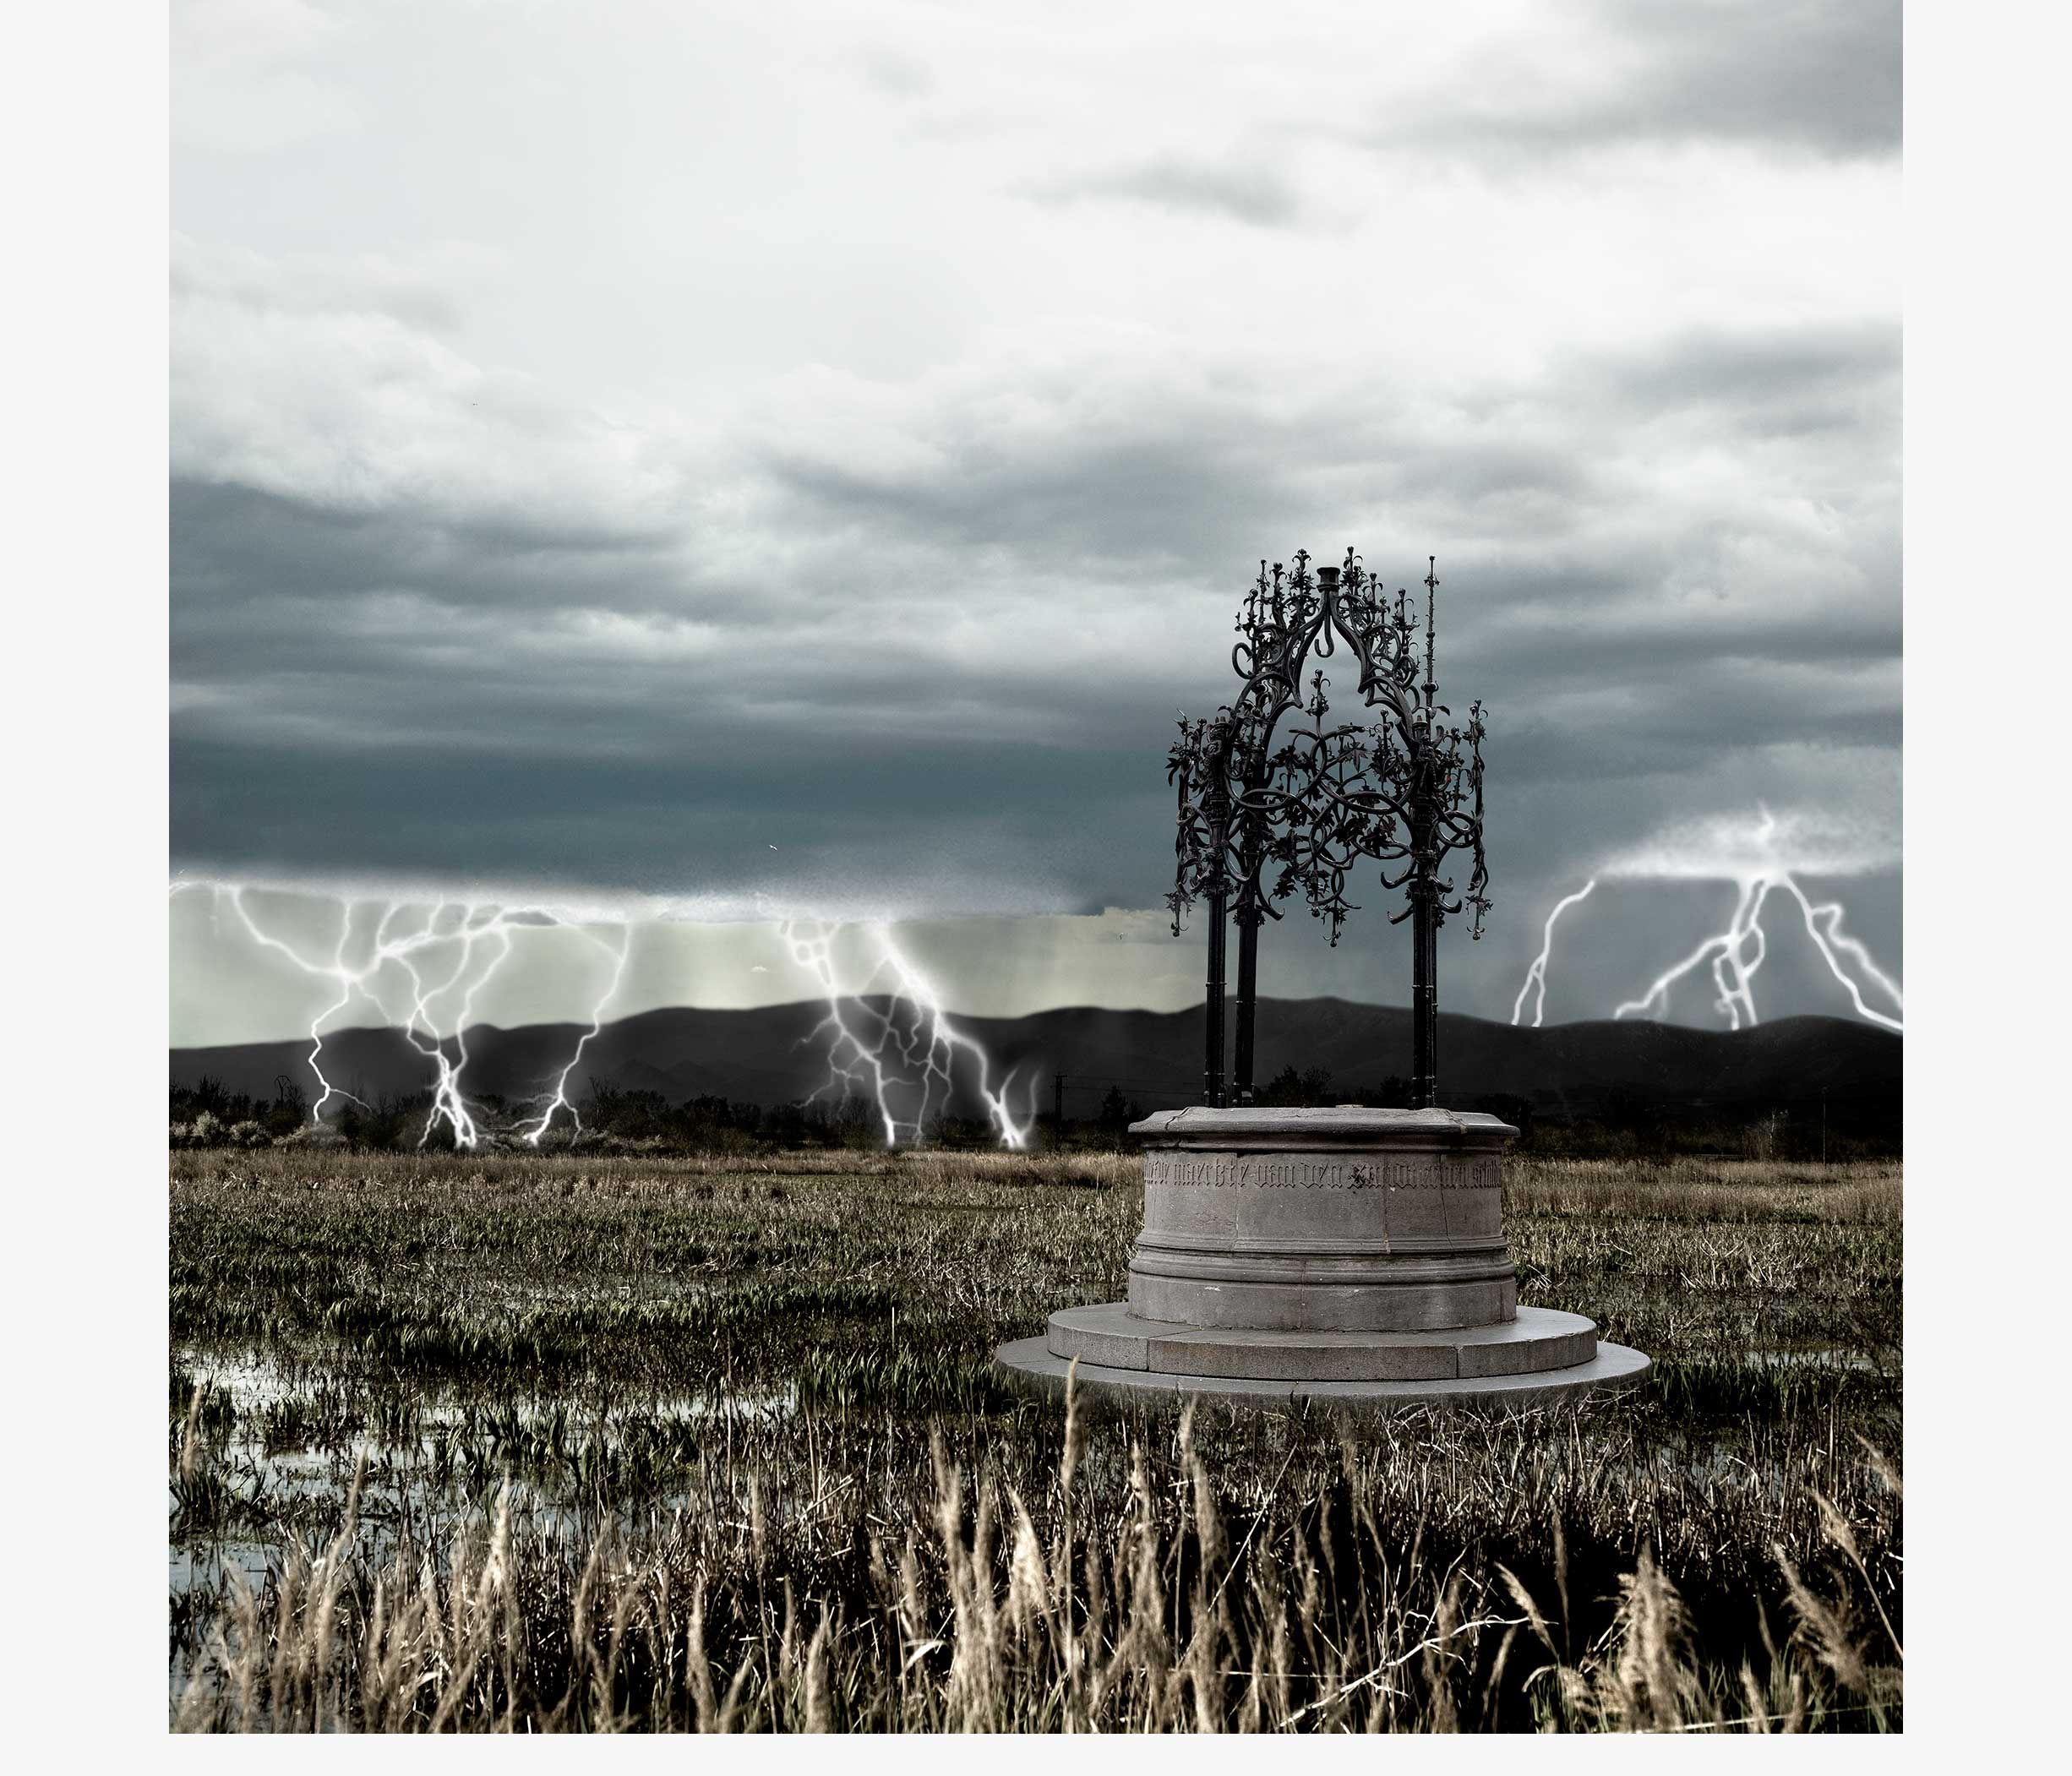 mysterious thunder for the odd scenery photo serie